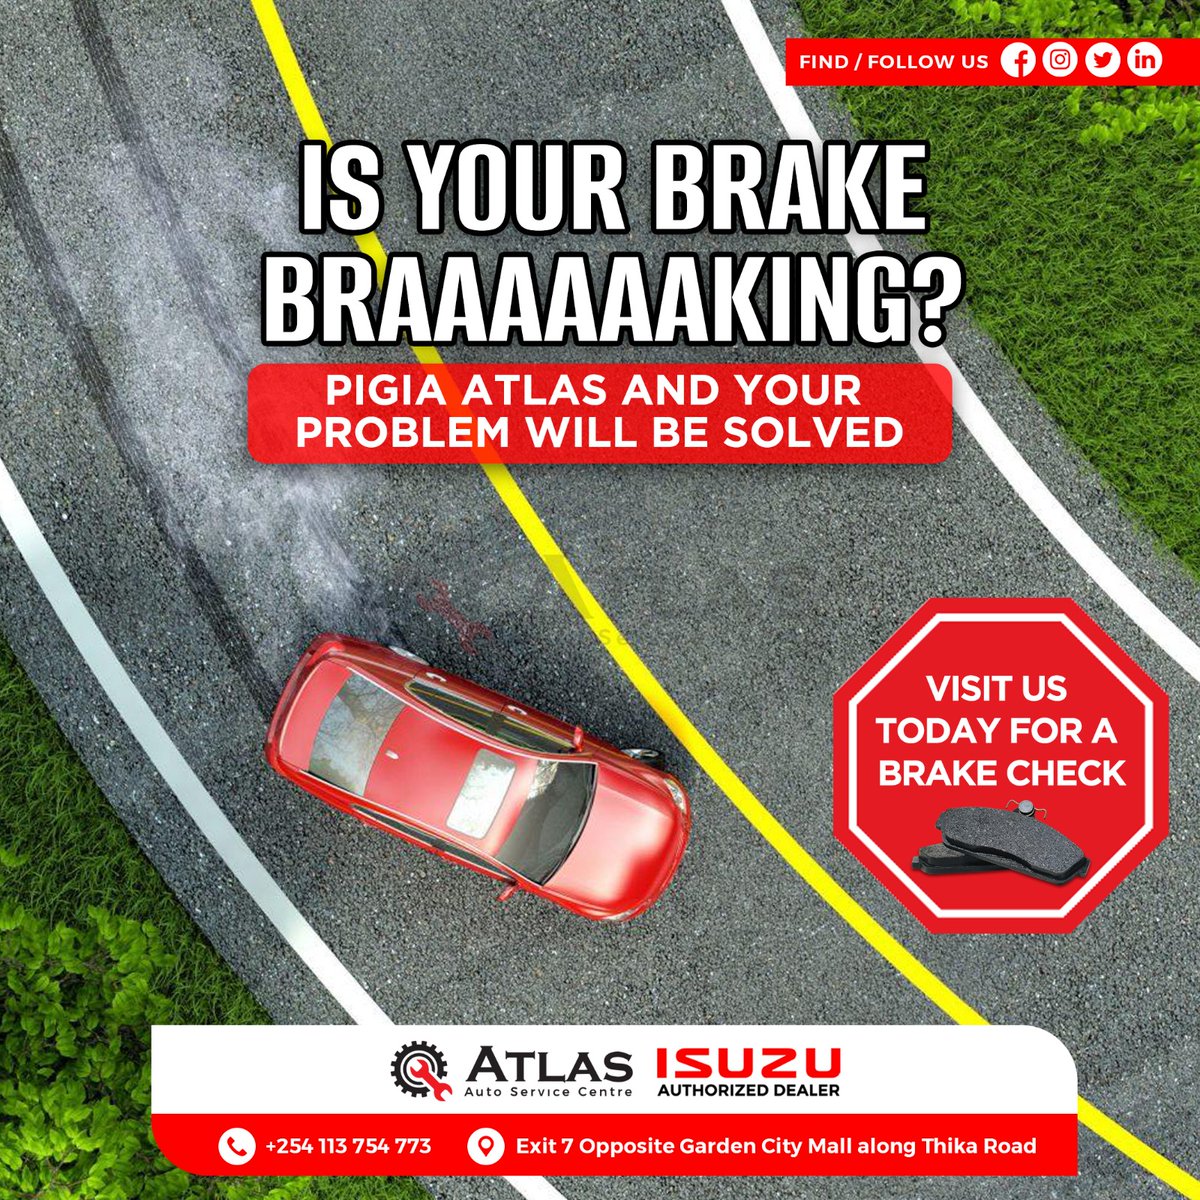 Is your brake BRAAAAAAKING? 🚗💨 Don't worry! Give @Atlasautocentre a ring, and your problem will be solved in a jiffy. Visit us today for a brake check and drive with confidence! #howcanwehelp #garage #IsuzuDeals #BrakeCheck #ProblemSolved #QualityService #PortraitMaster #kmtc